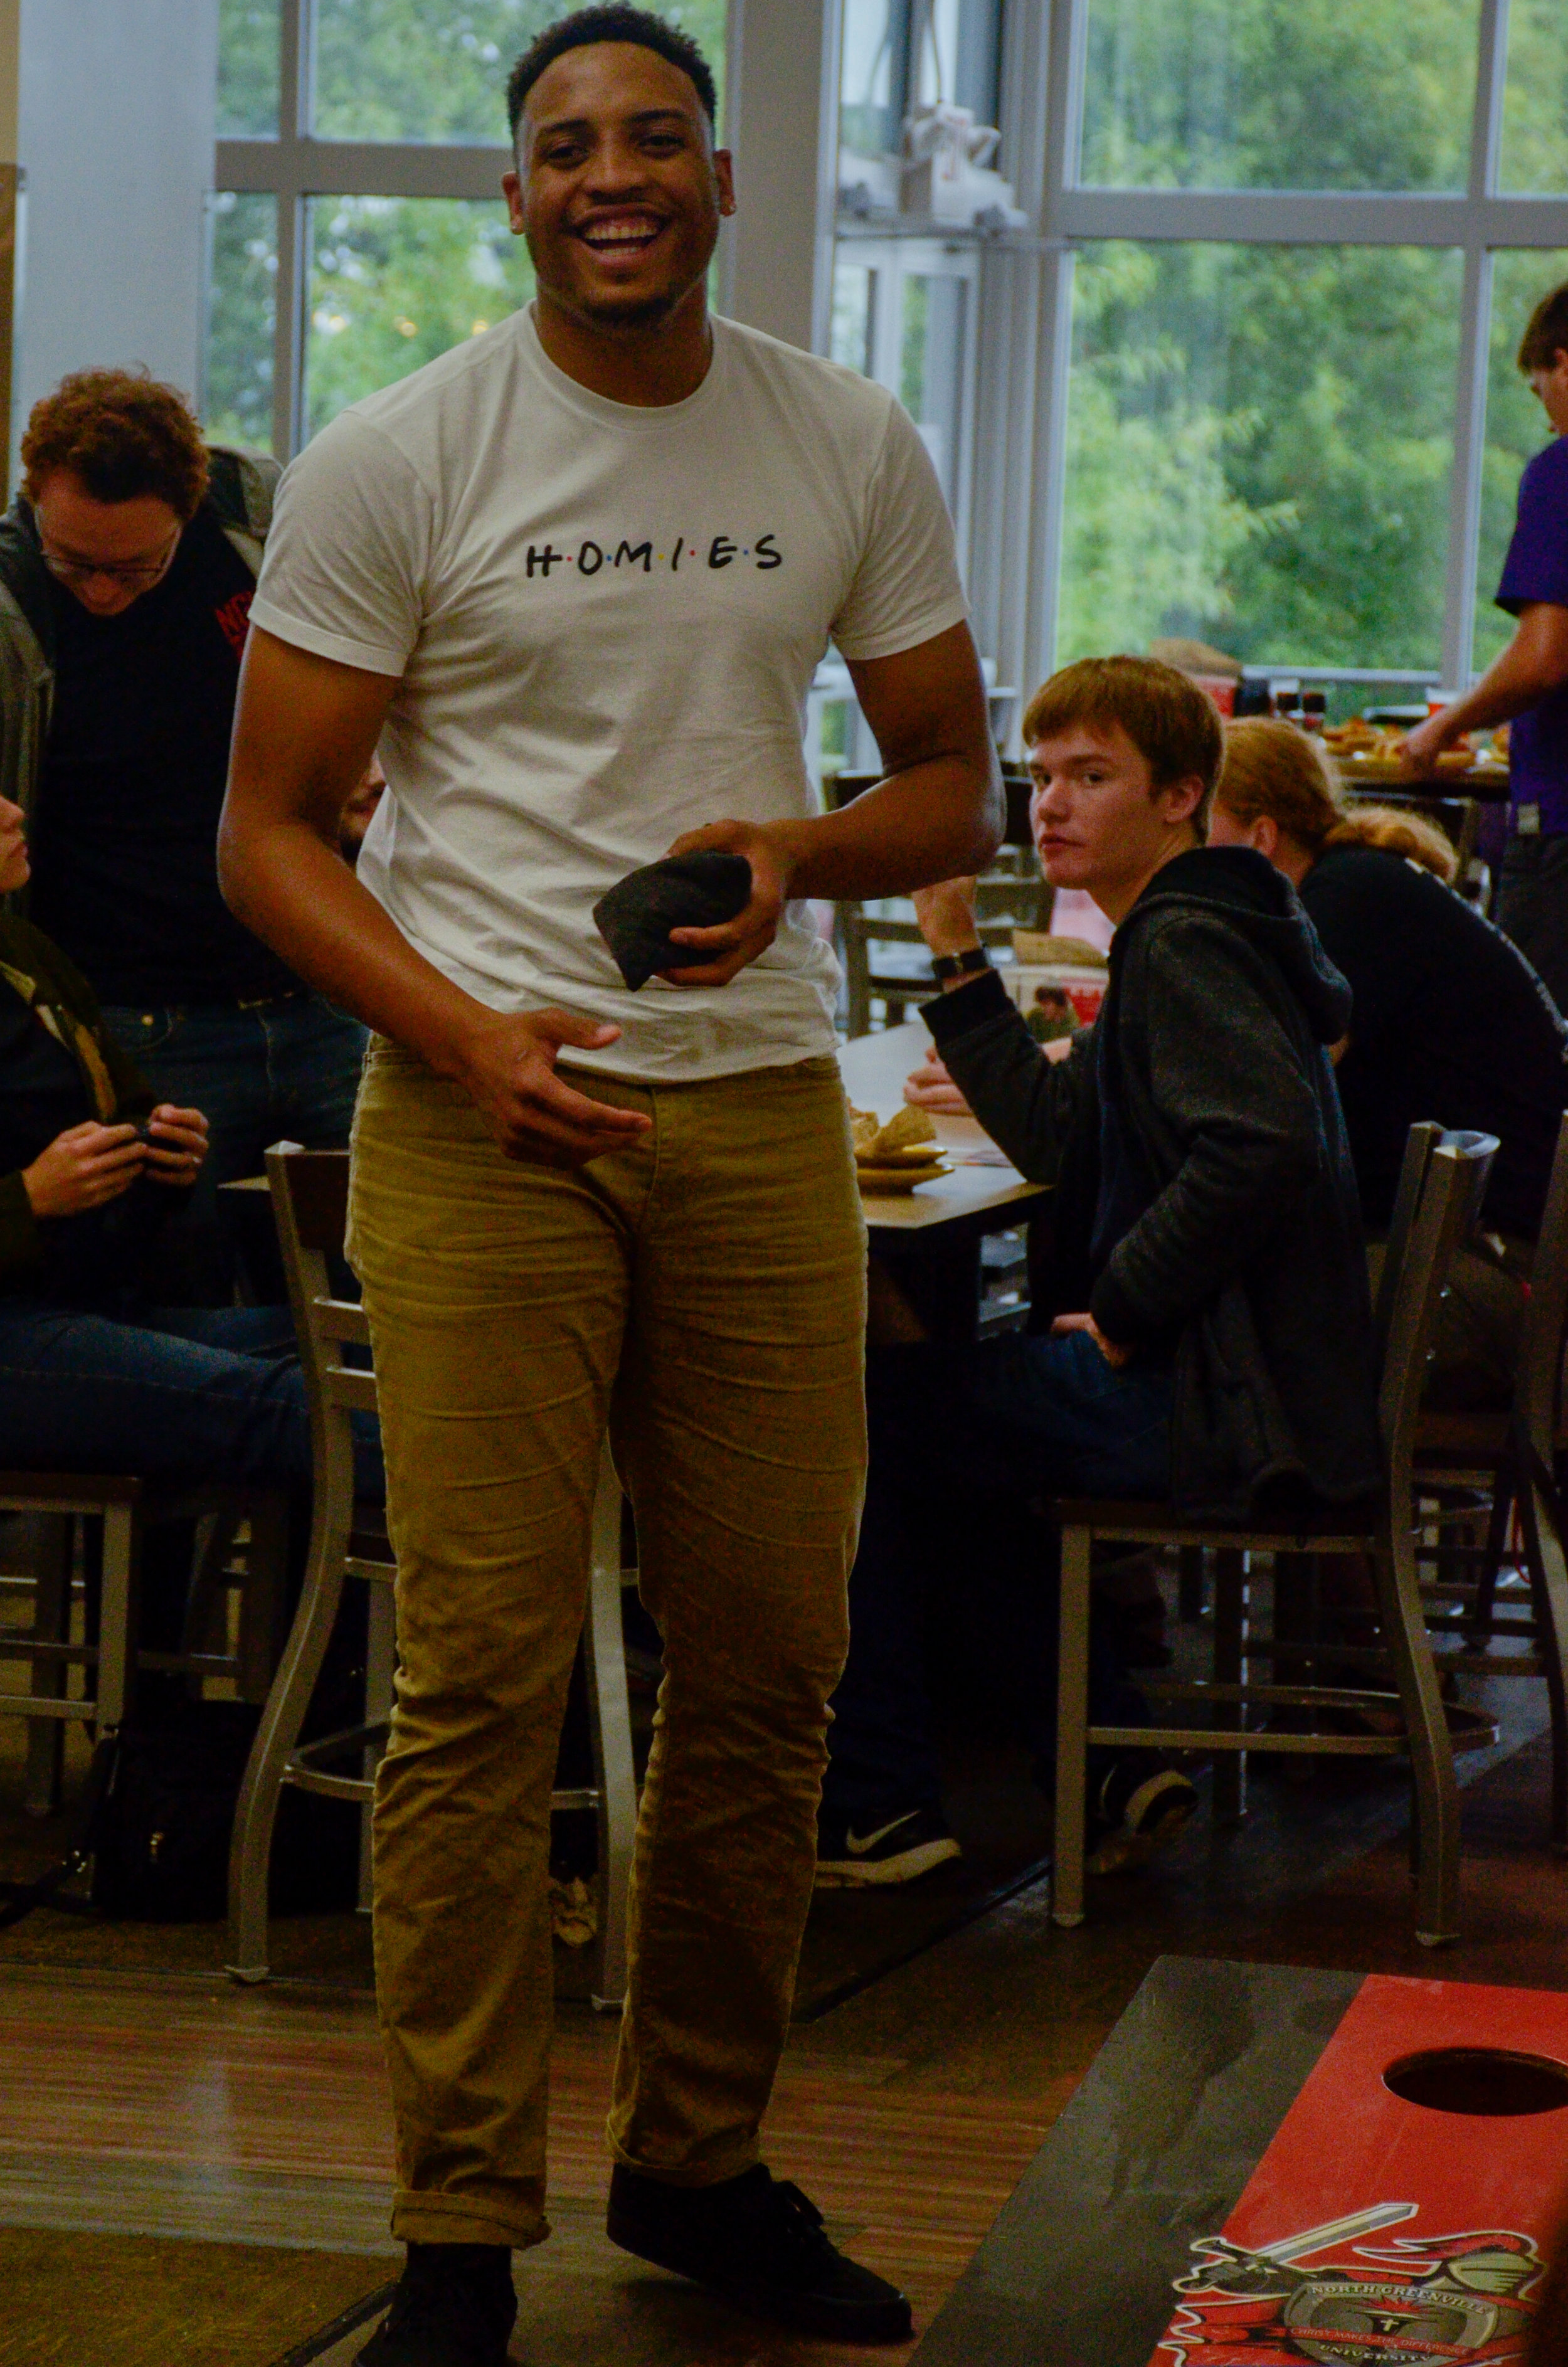 Chris Taylor, junior, gets his mind off of classes while playing Corn Hole in the cafeteria during a tailgating party before the football game on Thursday.